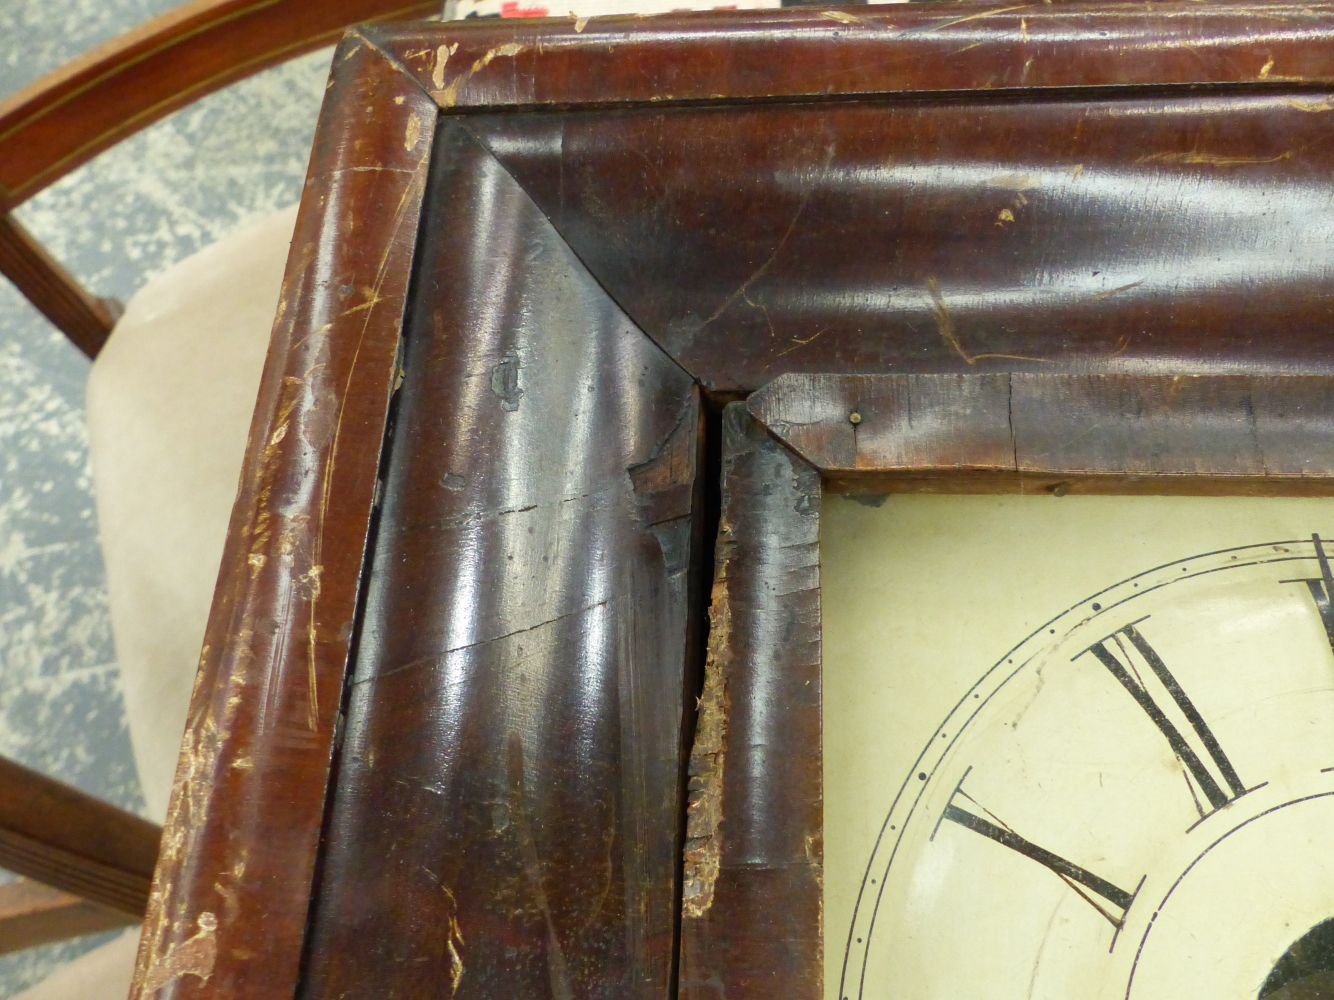 AN AMERICAN GLAZED MAHOGANY CASED WALL CLOCK BY BREWSTER AND INGRAHAMS, THE MOVEMENT STRIKING ON A - Image 5 of 5